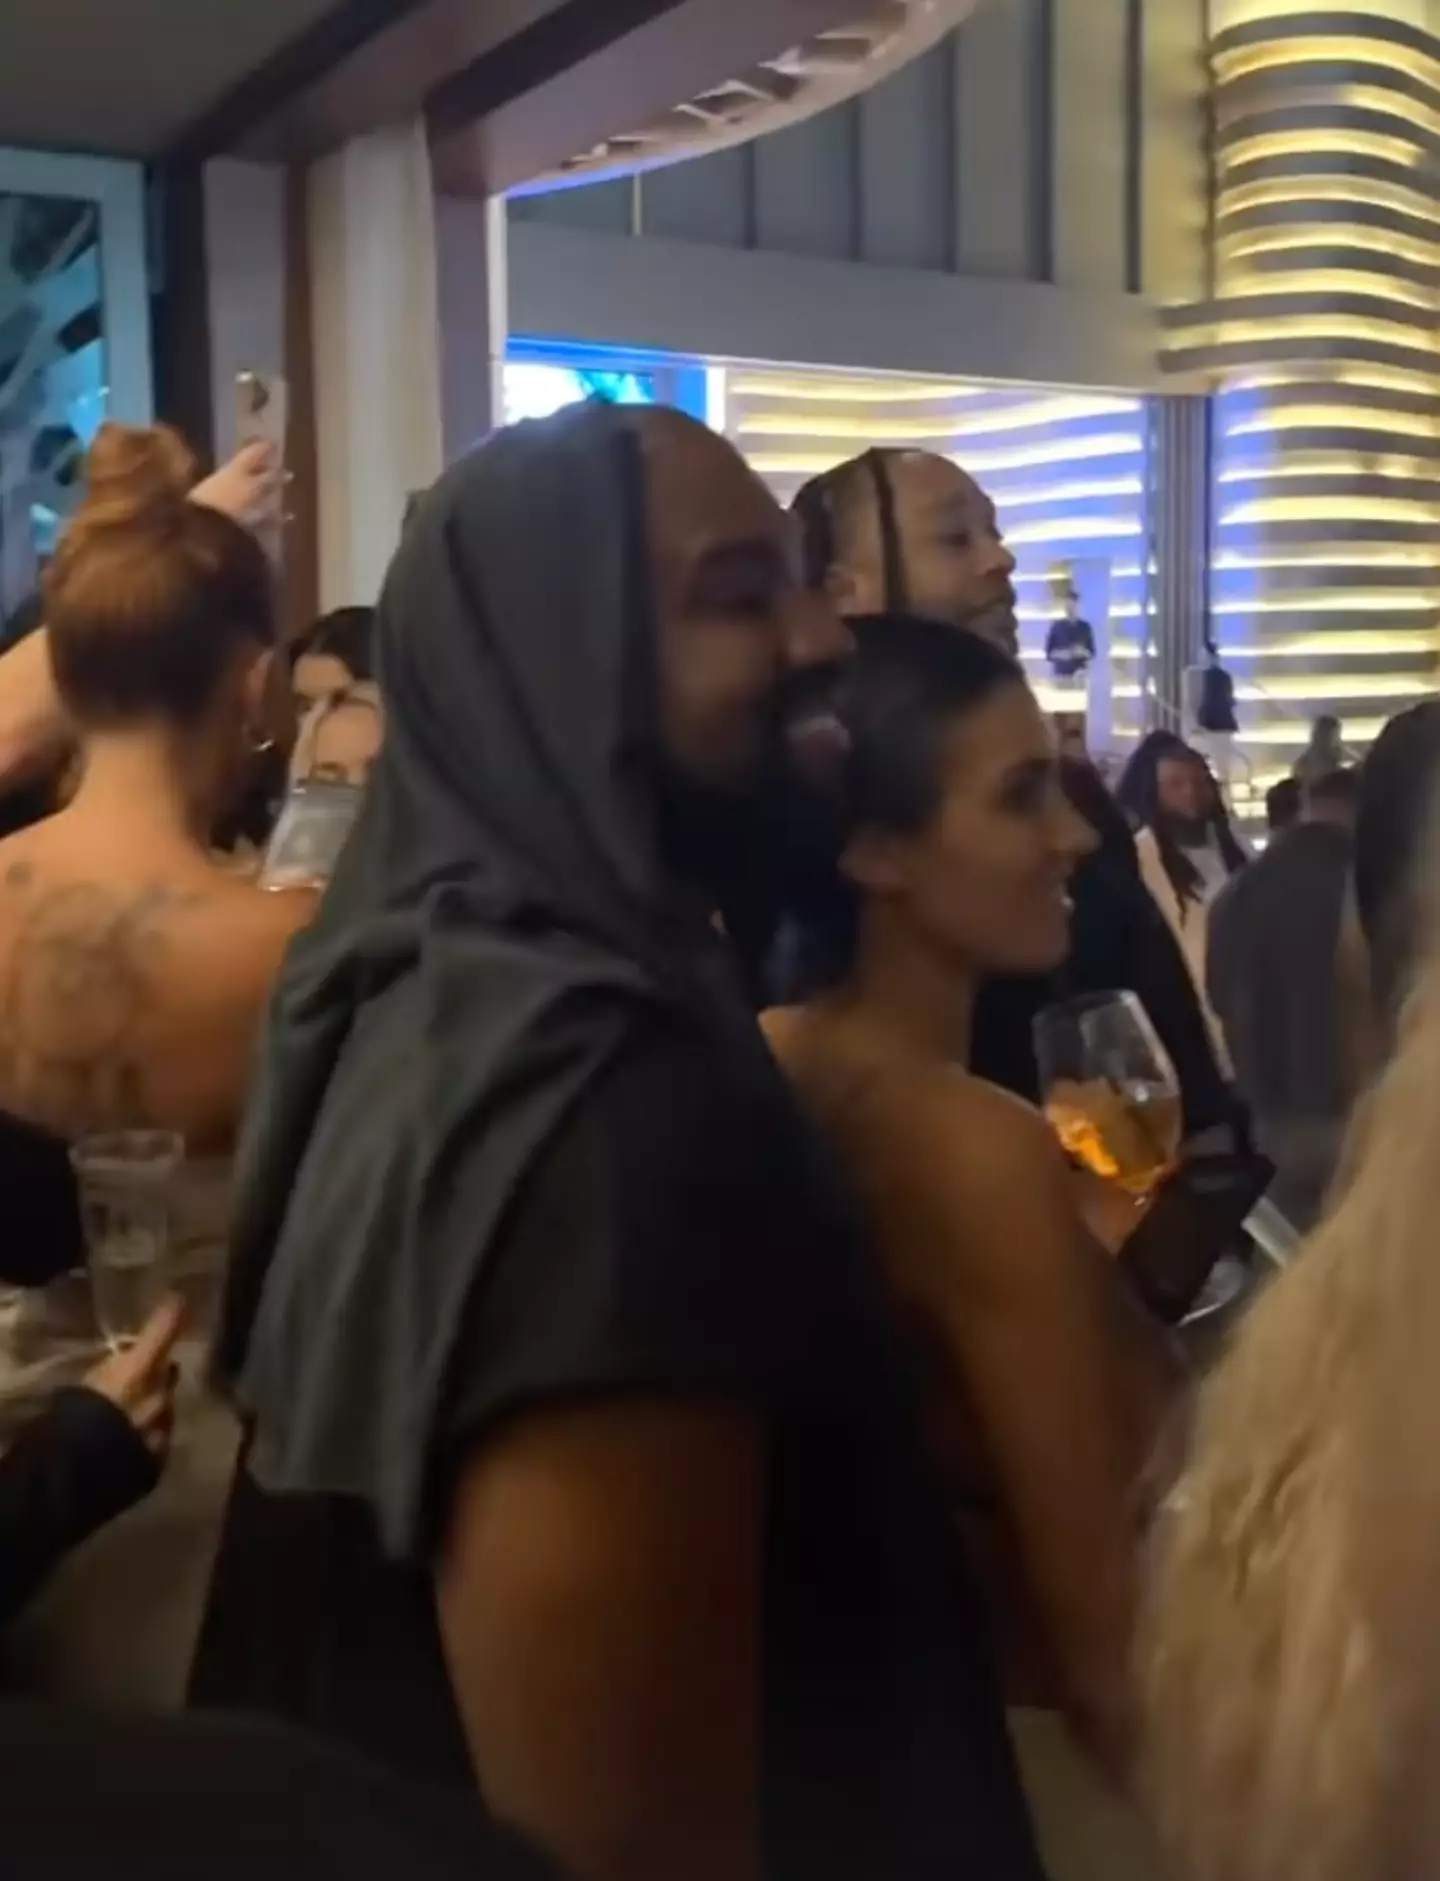 Bianca Censori and Kanye West were seen partying together in Dubai.